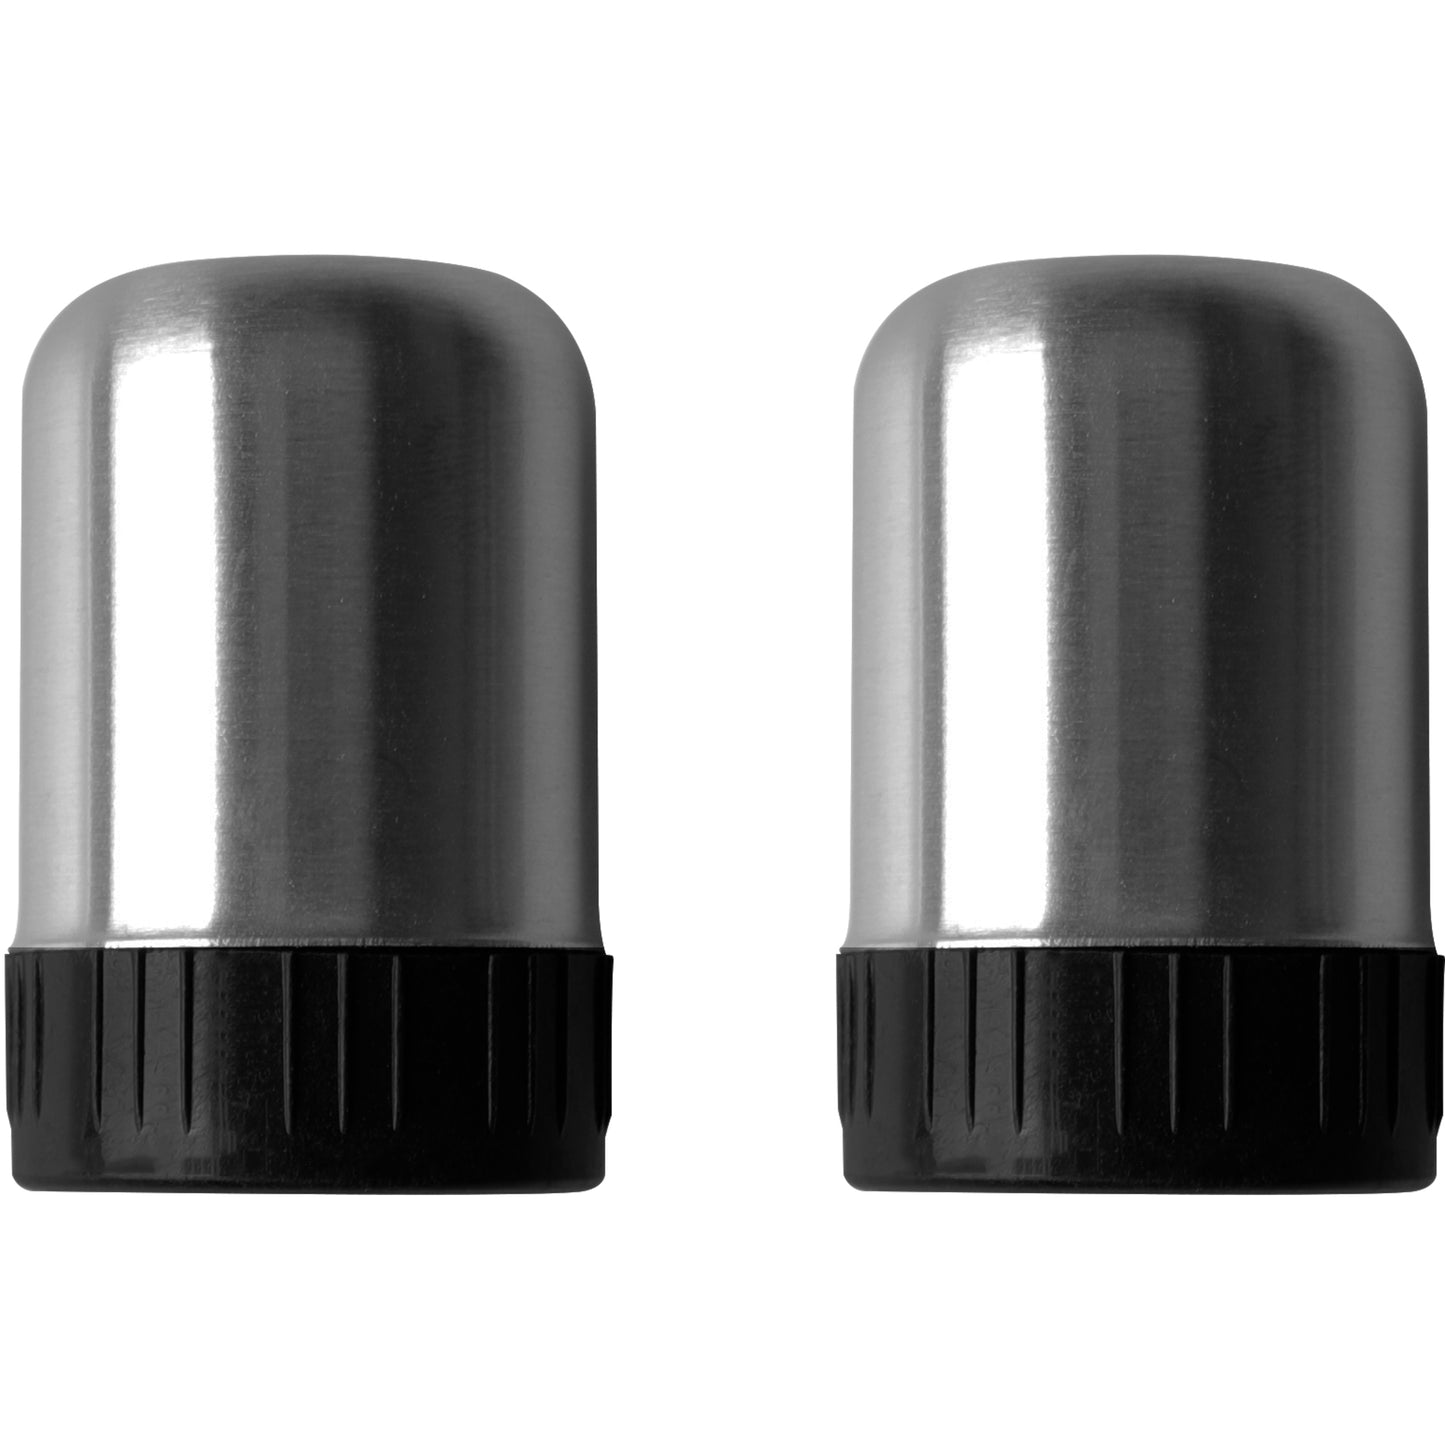 North Point® stainless steel 1 Pair of Salt & Pepper Shaker with black cap.